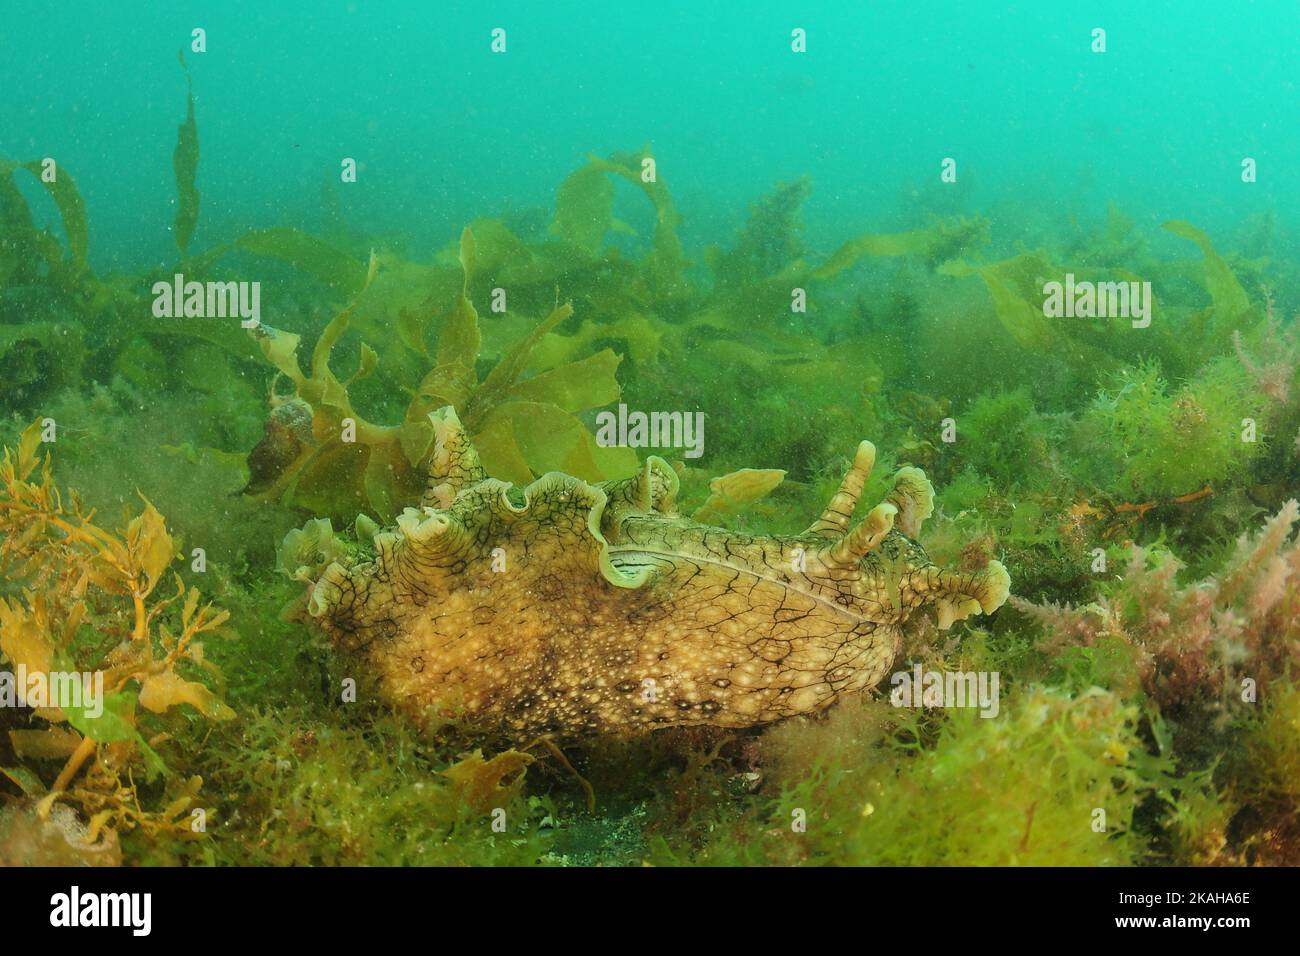 Large spotted sea hare Aplysia dactylomela on seabed among green and brown algae. Location: Leigh New Zealand Stock Photo